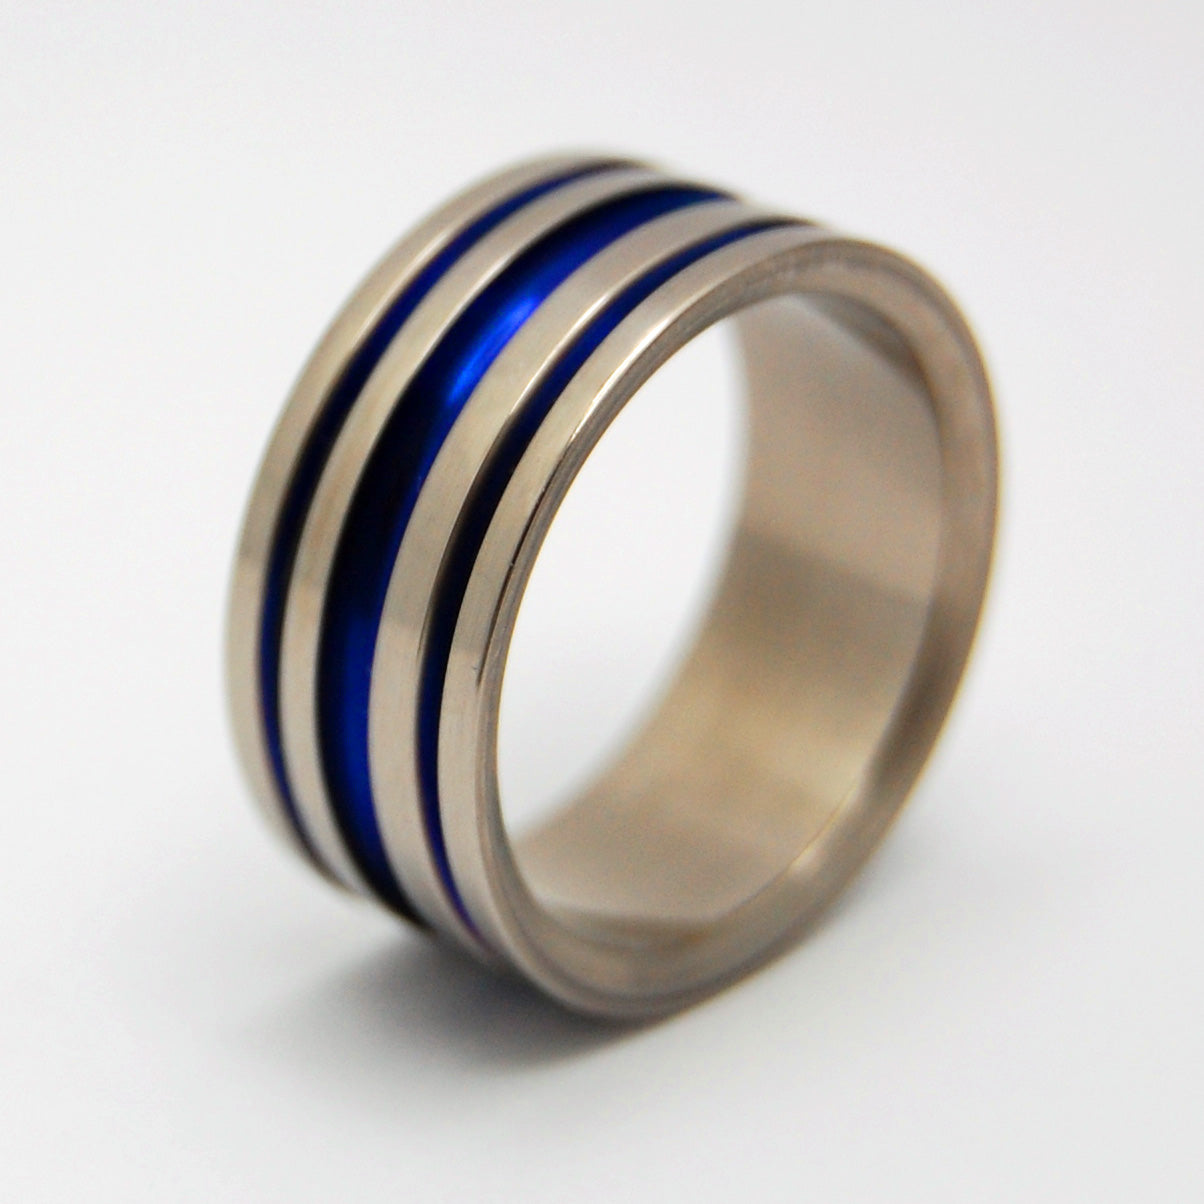 PERFECT GROOVE | Blue Anodized Titanium Wedding Rings - Minter and Richter Designs